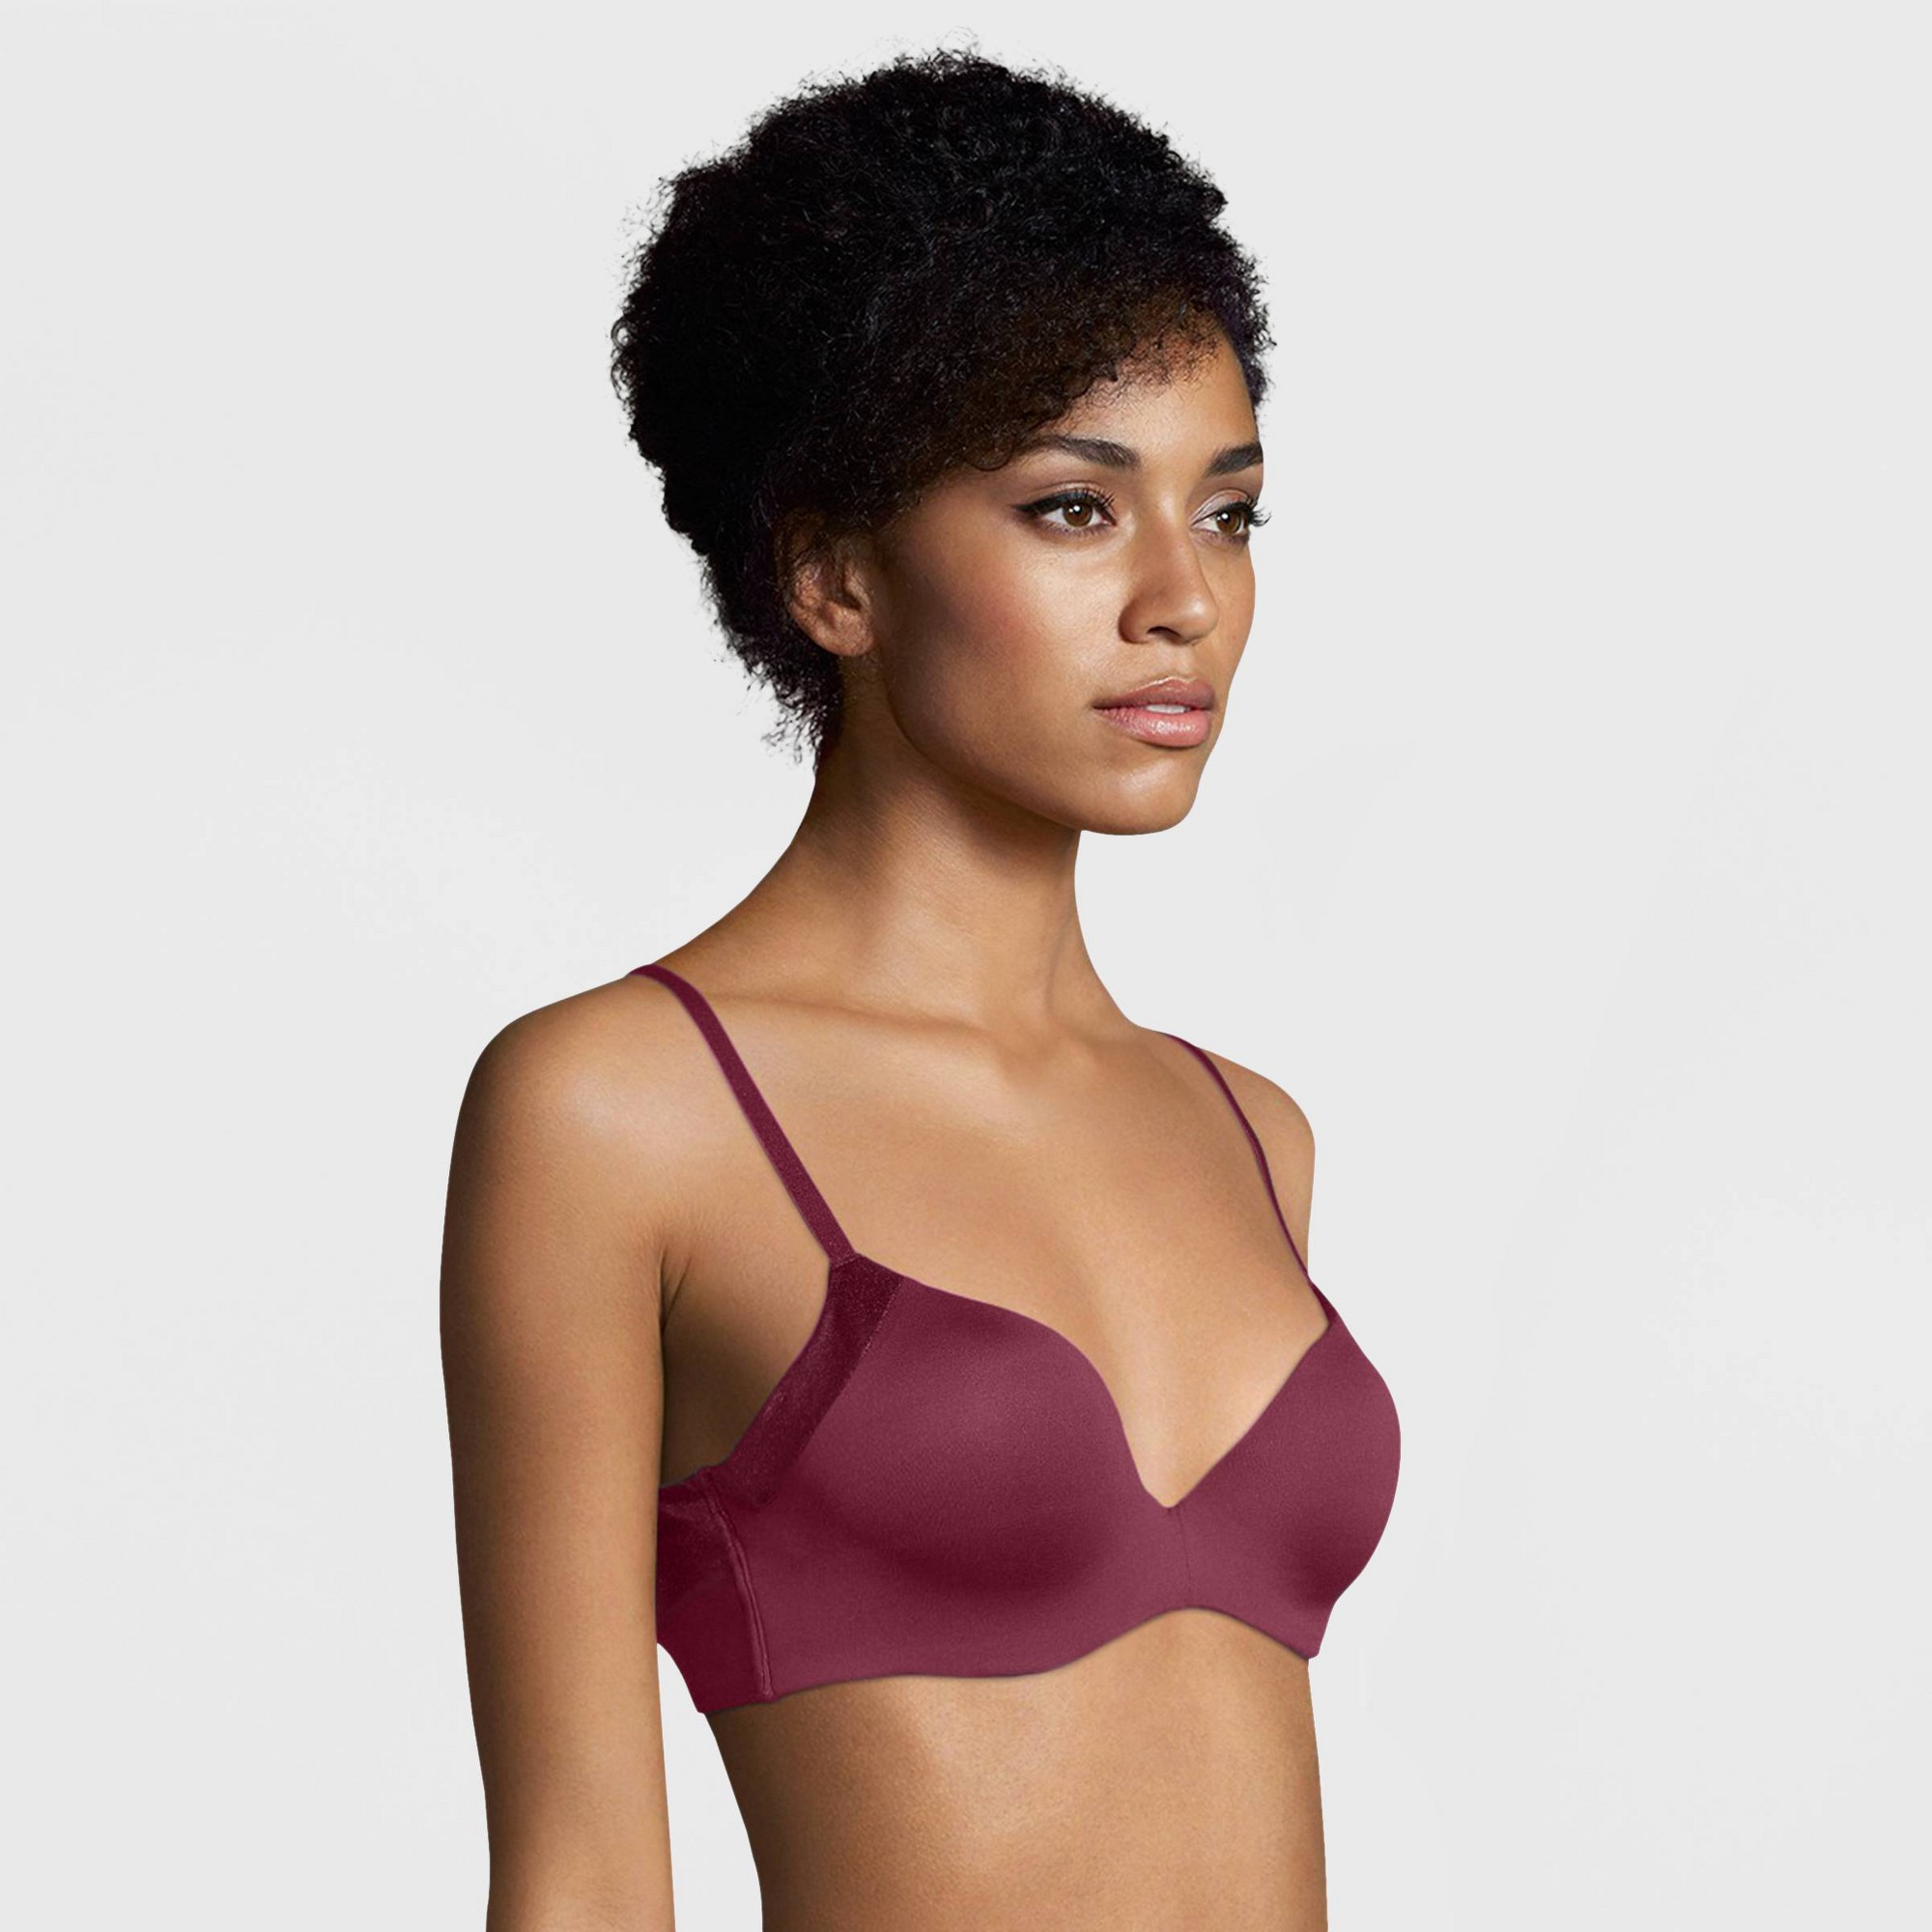 Maidenform Self Expressions Women's Smooth Finish Push-Up Bra SE0009 - Red  40D, by Maidenform